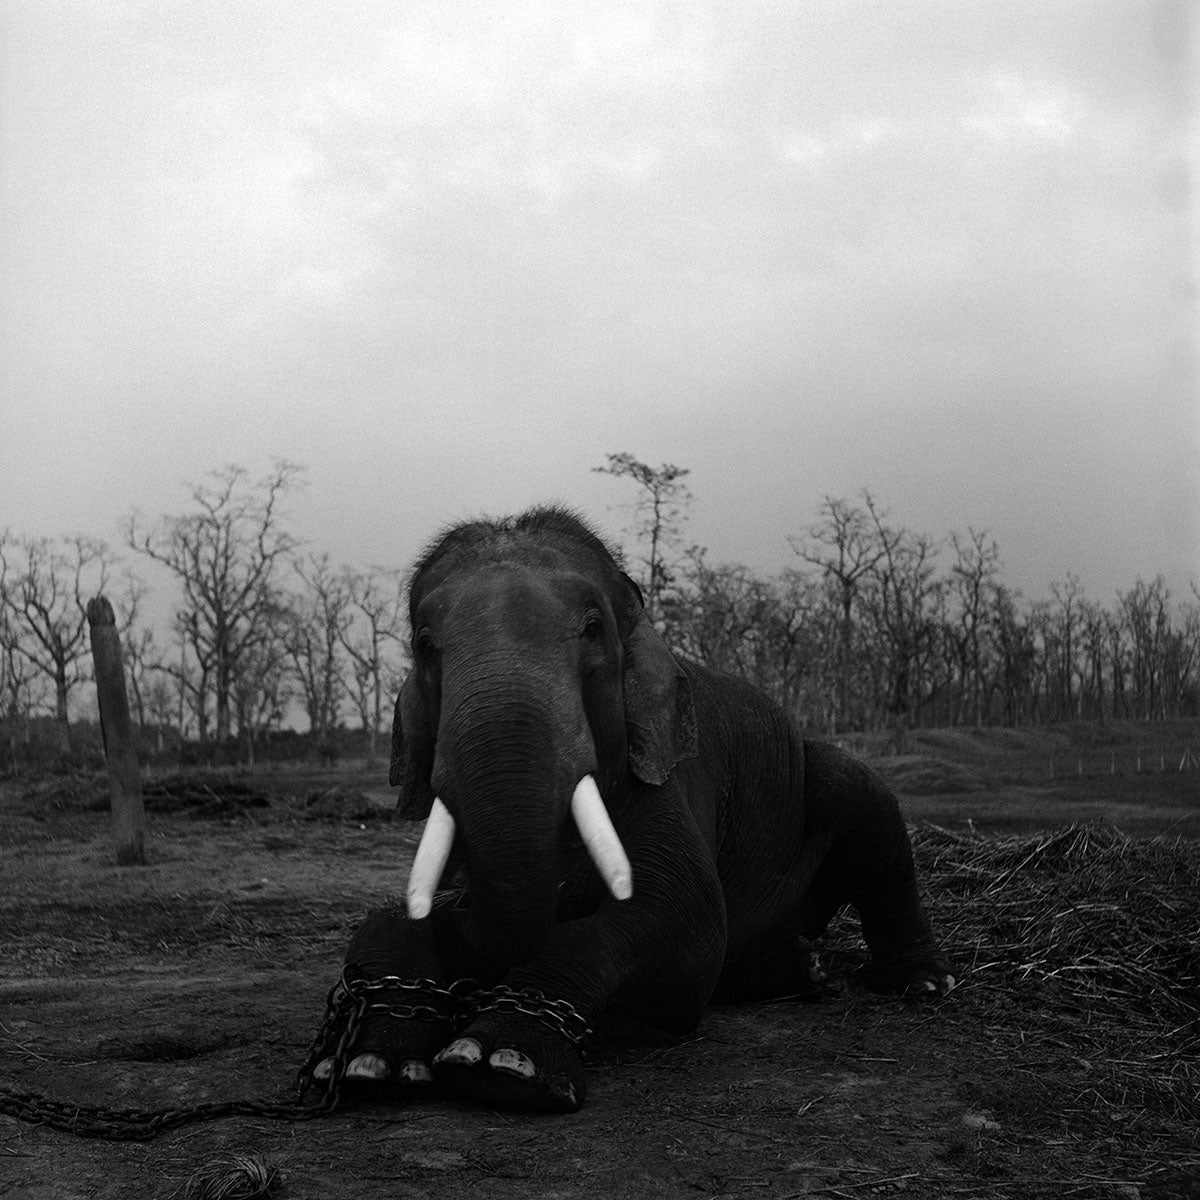 Chained Elephant